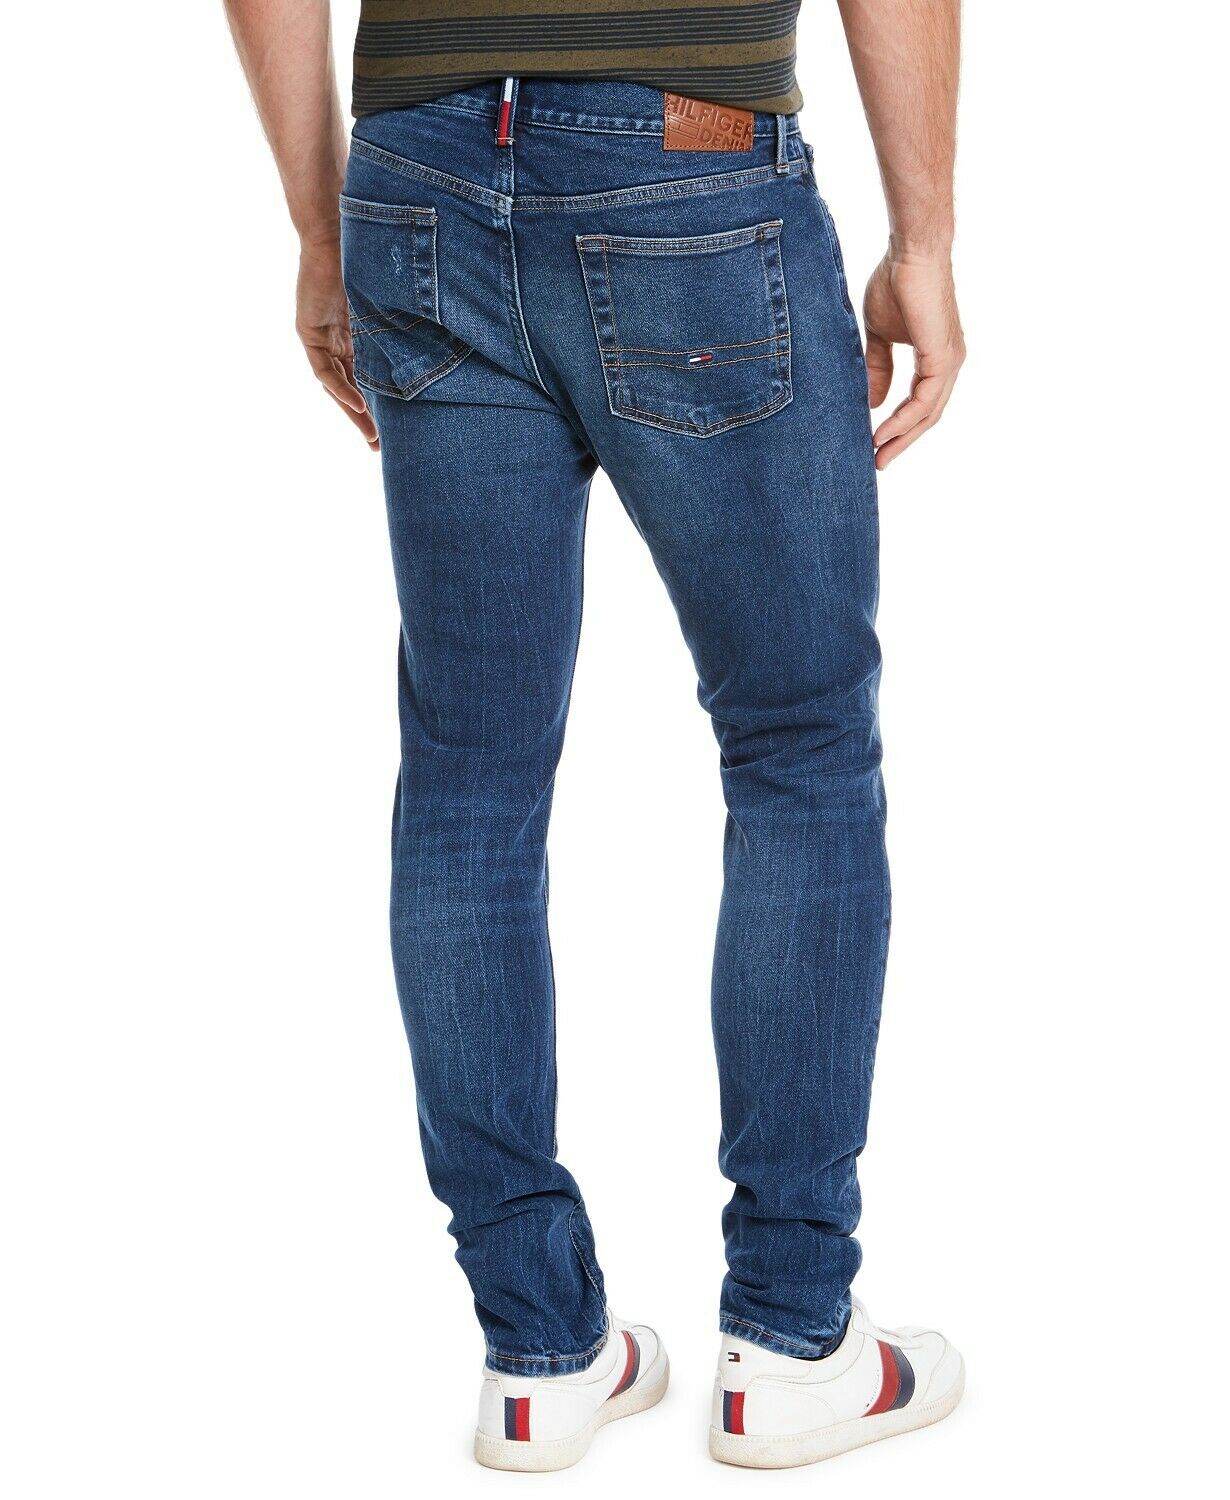 Tommy Hilfiger Men's Jeans Various Types Sizes Skinny and Slim Fit B4HP ...